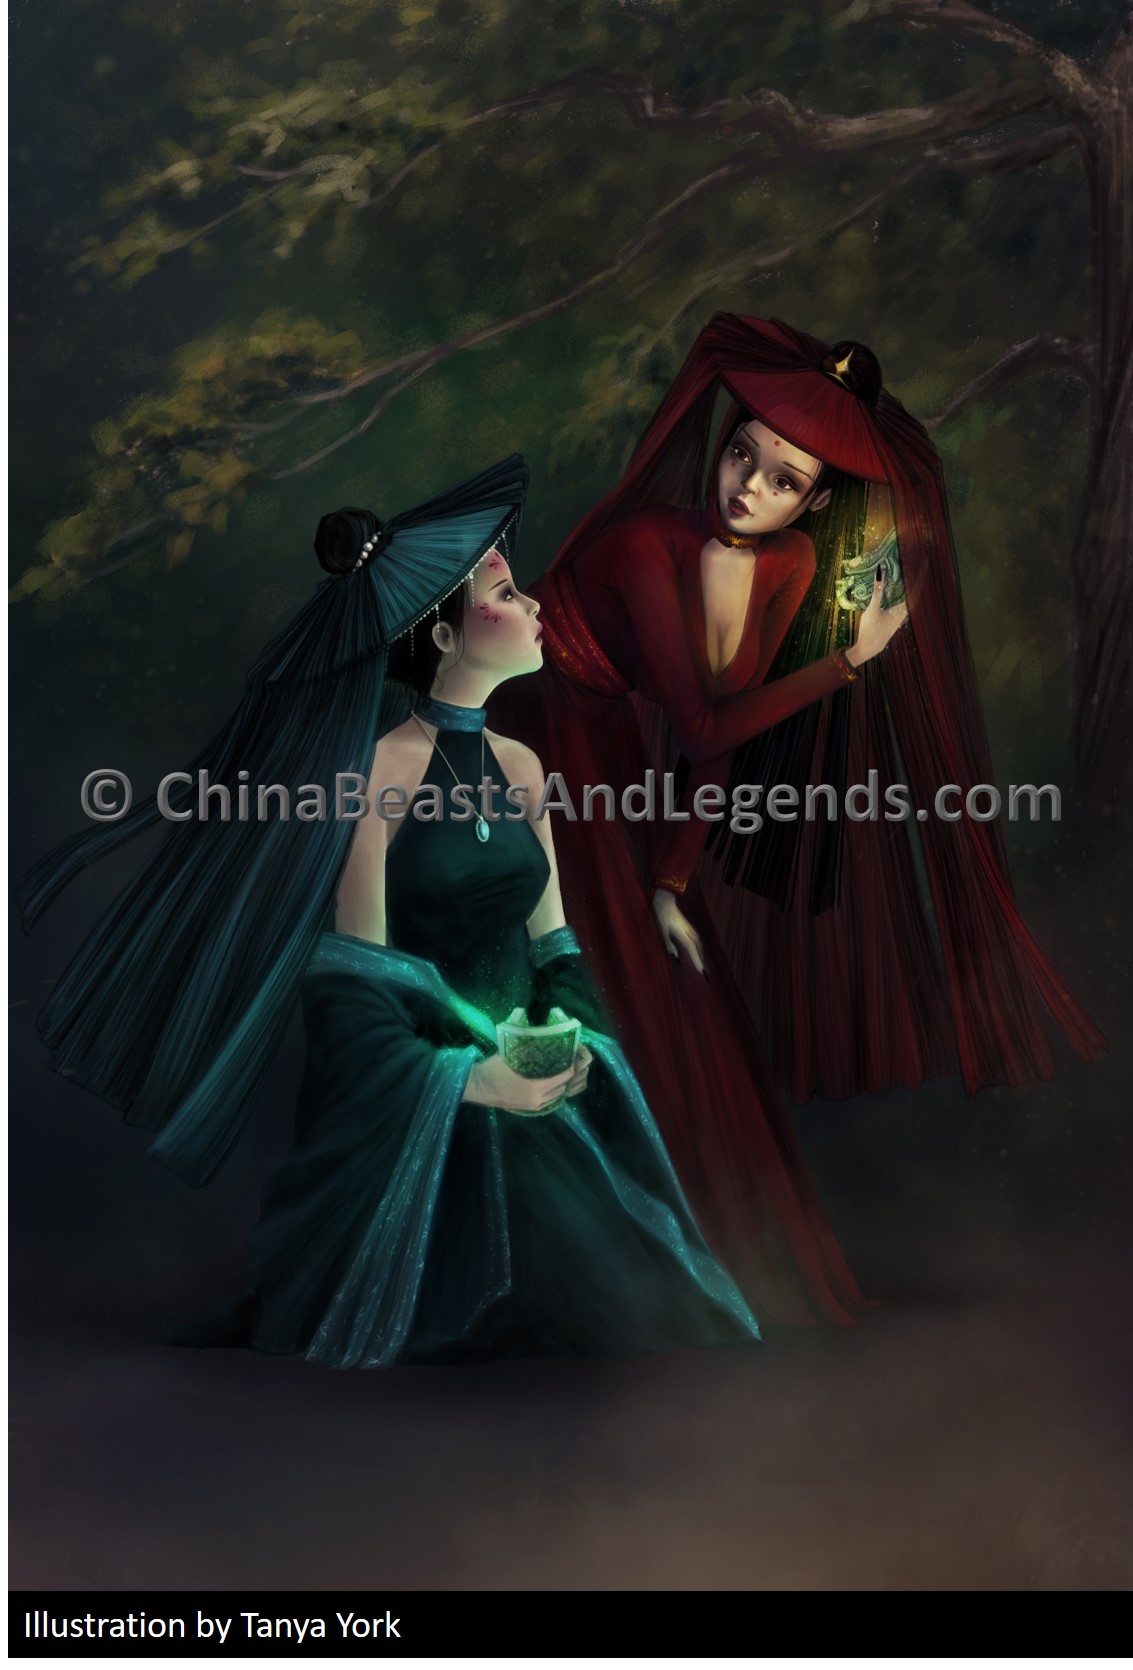 The Witches Ji and Qi 女巫祭和戚.jpg